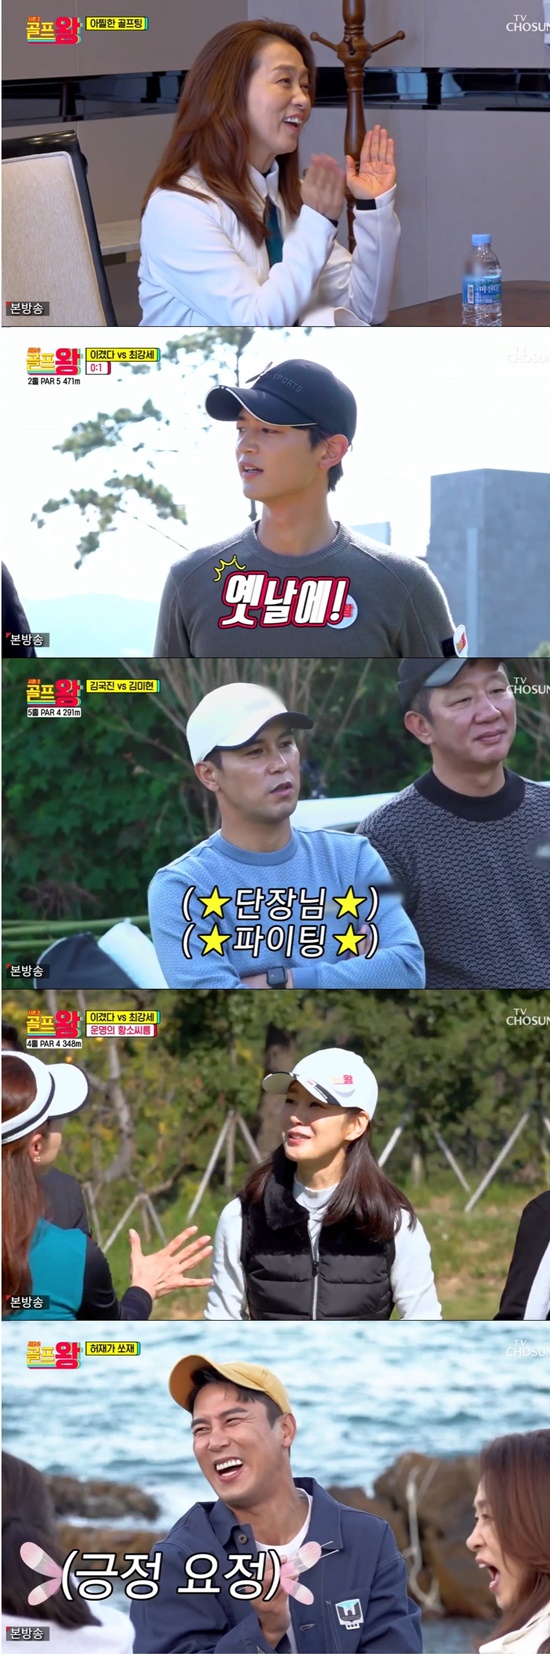 In the 5th episode of Golf King 2, TV Chosun, which was broadcast on the 15th, Hur Jae - Jang Min-Ho - Yang Se-hyeong - Minho tried to form a mixed team with Myung Se-bin - Gong Hyun-joo - Moon Hee Kyung - Rae-yeon Kang The pink mood, of course, was a new harmony that was not seen before.Prior to Kyonggi, Kim Gook Jin and Kim Mi-hyun announced that they would tear up the members of Golf King 2 in advance of the Golf King Duets Masters.Yang Se-hyeong, who was the first to start the waiting room with guests to form a team, entered the room where Rae-yeon Kang, known as the first love of the people Myung Se-bin and the Golf teacher of Girls Generation Yuri, waited.Rae-yeon Kang, who had been Confessions just before Baro, told Myung Se-bin to marry Yang Se-hyeong, was tearful and liked when Yang Se-hyeong came in.Hur Jae, who entered the room where Jang Min-Ho motive Moon Hee Kyung and High Class Actor Gong Hyun-joo waited, started an intimate meeting with Baro on the story of 84th grade like Moon Hee Kyung.Jang Min-Ho, who came to the same room afterwards, confessed to the unexpected fact that he was a graduate student with Moon Hee Kyung, and Moon Hee Kyung said, There is a lot of introspection and shame.The youngest Minho followed Yang Se-hyeongs voice to the room as if it were holly, and in an exciting meeting, Yang Se-hyeong-Minho-Myung Se-bin-Rae-yeon Kang and Hur Jae-Jang Min-Ho-Gong Hyo-joo- Moon Hee Kyung team were completed.Golf King members showed excitement in a new Battle method that blends with each teams actors.When Minho succeeded in teeing at the 4th to 4th group Kyonggi 1 hole, which started in a tense nervous battle, the same team members shouted slogans, and Jang Min-Ho fell into the hazard and was teased by Yang Se-hyeong.Moreover, Myung Se-bin, who was a hundred times the burden, was cheered by a magical shot that stuck to the hole cup after Ongreen.Hur Jae and Jang Min-Ho cheered on the Gong Hyun-joo who could not get on the green, saying, Its okay because its the first hole. However, the team of Minorcese eventually won.Golf King Signature 4 to 4 Time Attack Before the Minorcese team showed up with a winner, the win team said, Game is now.In the middle of the fair Lee Jin-hyuk, he moved to the front of the green, and under the rule that gave the fast-incoming team a Benefit -1, the win team finished with a mistake sent by Jang Min-Ho to the seabed to the ankle band after wearing it, but the Minorcese team, which came in 42 seconds earlier and had a few hits, won another win.On the way to the third hole, Rae-yeon Kang said, If we win so hard, we do not have to go to the broadcast. Yang Se-hyeong worried about the amount, and Yang Se-hyeong said, We tend to go ahead.In the third hole, Yang Se-hyeong and Minho used the win team slogan to play the victory and play the game, and Gong Hyun-joo grabbed his head and Hur Jae burst into anger.At this time, Kim Gook Jin joined the team win and Kim Mi-hyun joined the Miforce team, and Kim Mi-hyun said, Jin team buys until evening.Moon Hee Kyung and Myung Se-bin faced each other in the third hole, and Myung Se-bin jumped on the road and said, Is this Golf?, which led to Hur Jaes cause, Yang Se-hyeong cheered up, saying it was a luck skill.Kim Gook Jin lectured Moon Hee Kyung how to easily hit him, but Myung Se-bin recorded the victory.In the event hall where the men and women of both teams ran like bulls and picked up the flag first, Kim Gook Jin and Kim Mi-hyun played a revenge match, and Kim Mi-hyun dragged Kim Gook Jin like an angry bull and pulled out the flag.In particular, Myung Se-bin suddenly went to the house in junior high school, and he was a fan of Hur Jae, but Hur Jae and Moon Hee Kyung won the game by making Myung Se-bin and Yang Se-hyeong a man.Kim Gook Jin and Kim Mi-hyun opened a big match in the following five holes.Kim Gook Jin, who started without a practice swing, settled in the Fair Jean-hyuk and recorded a wave, and Kim Mi-hyun proved the class of the unremarkable class with a perfect birdie reminiscent of the LPGA Kyonggi and attracted the standing applause of everyone who watched.The last hall was a male female Duets couple, and Moon Hee Kyung - Hur Jaes same age harmony and Yang Se-hyeongs love affair with the Confessions of Rae-yeon Kangs pink mood shined.Hur Jae begged Yang Se-hyeong when the tee shot fell into the hazard, but Yang Se-hyeong sent the tee shot exactly as he predicted and gave his admiration.While Hur Jae and Moon Hee Kyung were in a hurry, Yang Se-hyeong and Rae-yeon Kang made pars, and the Miniforce team won the final victory unbeaten.In the meantime, Hur Jae of the win team from Kyonggi, as promised, served dinner, and enjoyed the sound of the waves by listening to the debut behind-the-scenes story of Myung Se-bin - Gong Hyun-joo - Moon Hee Kyung - Rae-yeon Kang and the chanson fall leaves of Moon Hee Kyung The story was beautifully finished.Golf King 2 is broadcast every Monday at 10 pm.Photo = TV Chosun Broadcasting Screen